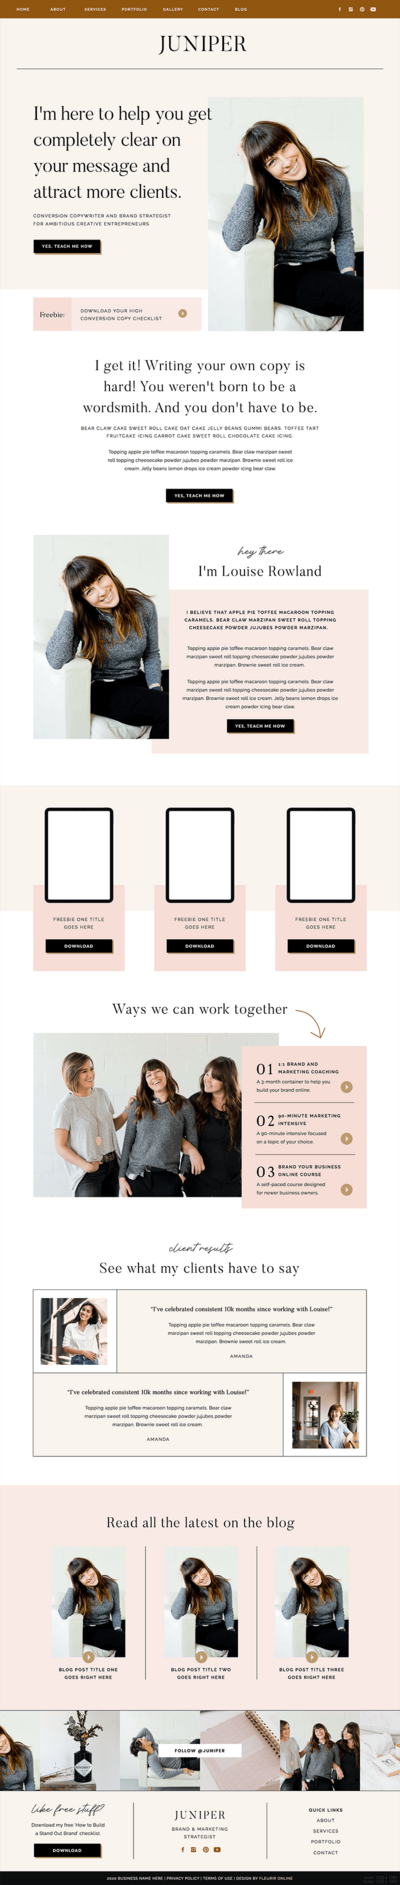 Juniper Showit website template for coaches, creatives and photographers